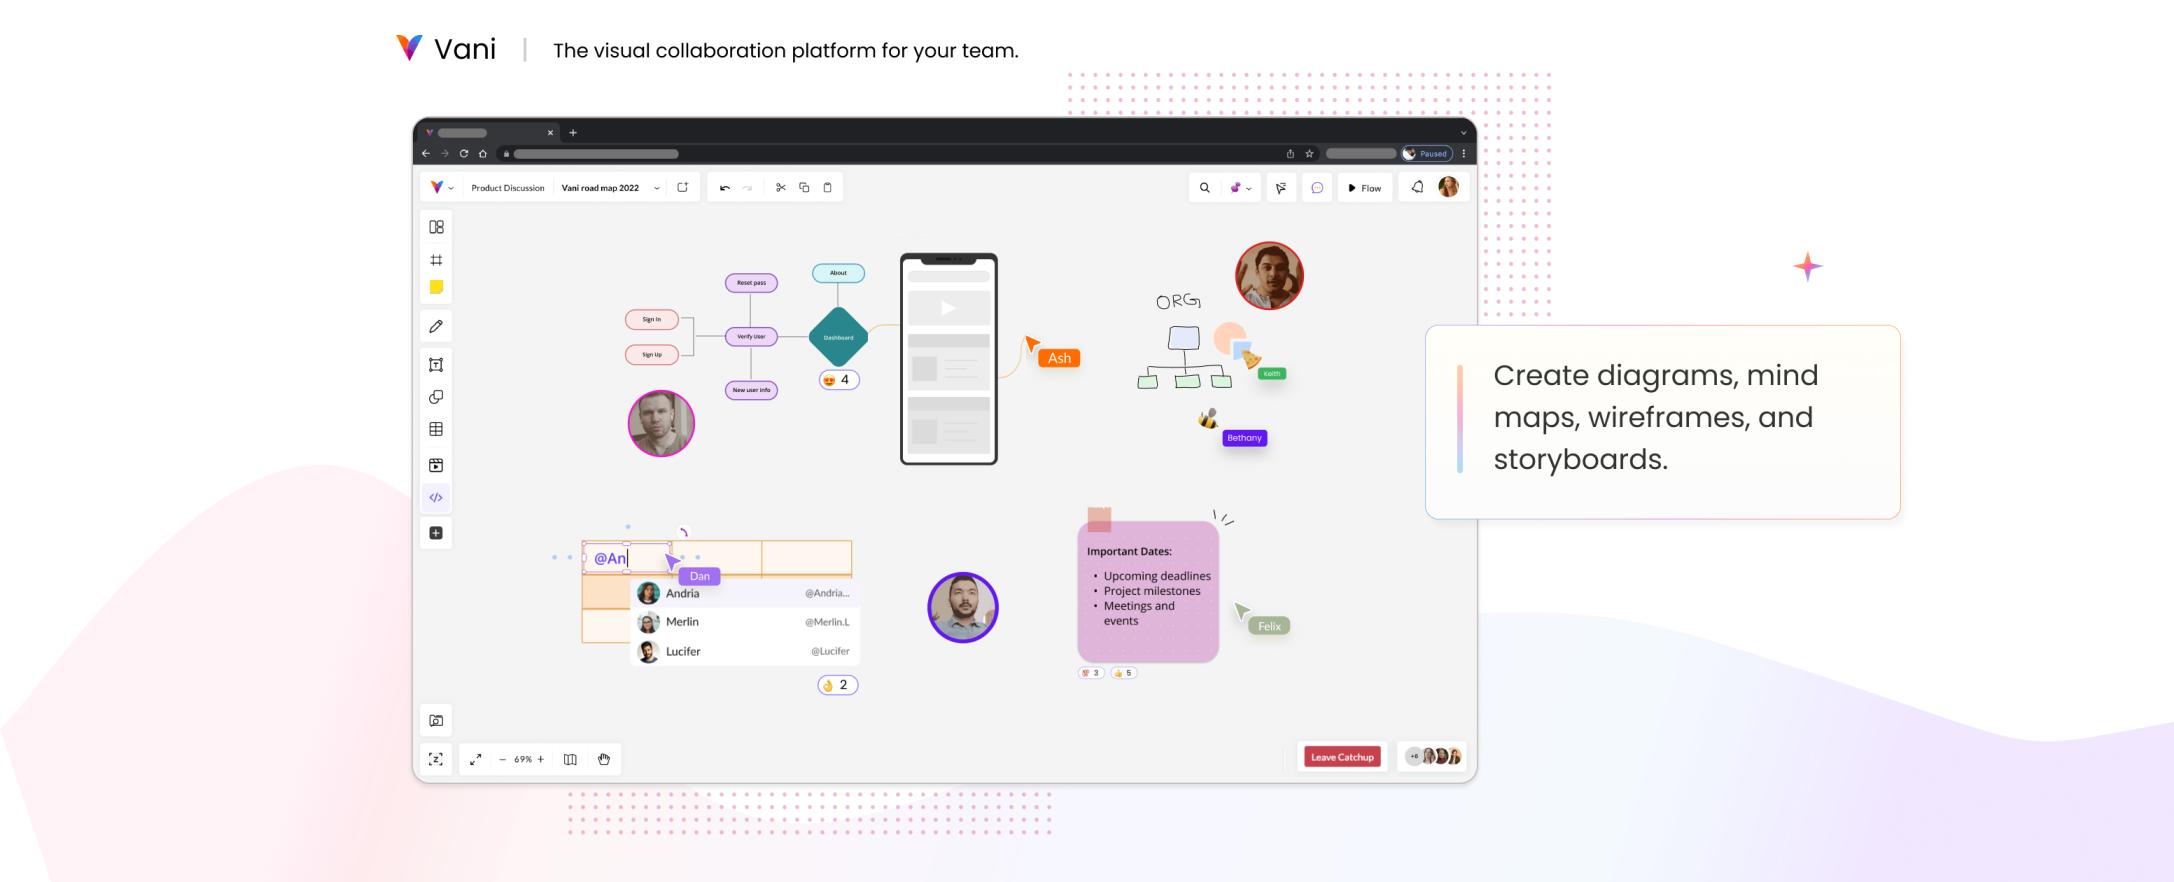 Vani - Create diagrams, mind maps, wireframes, and storyboards